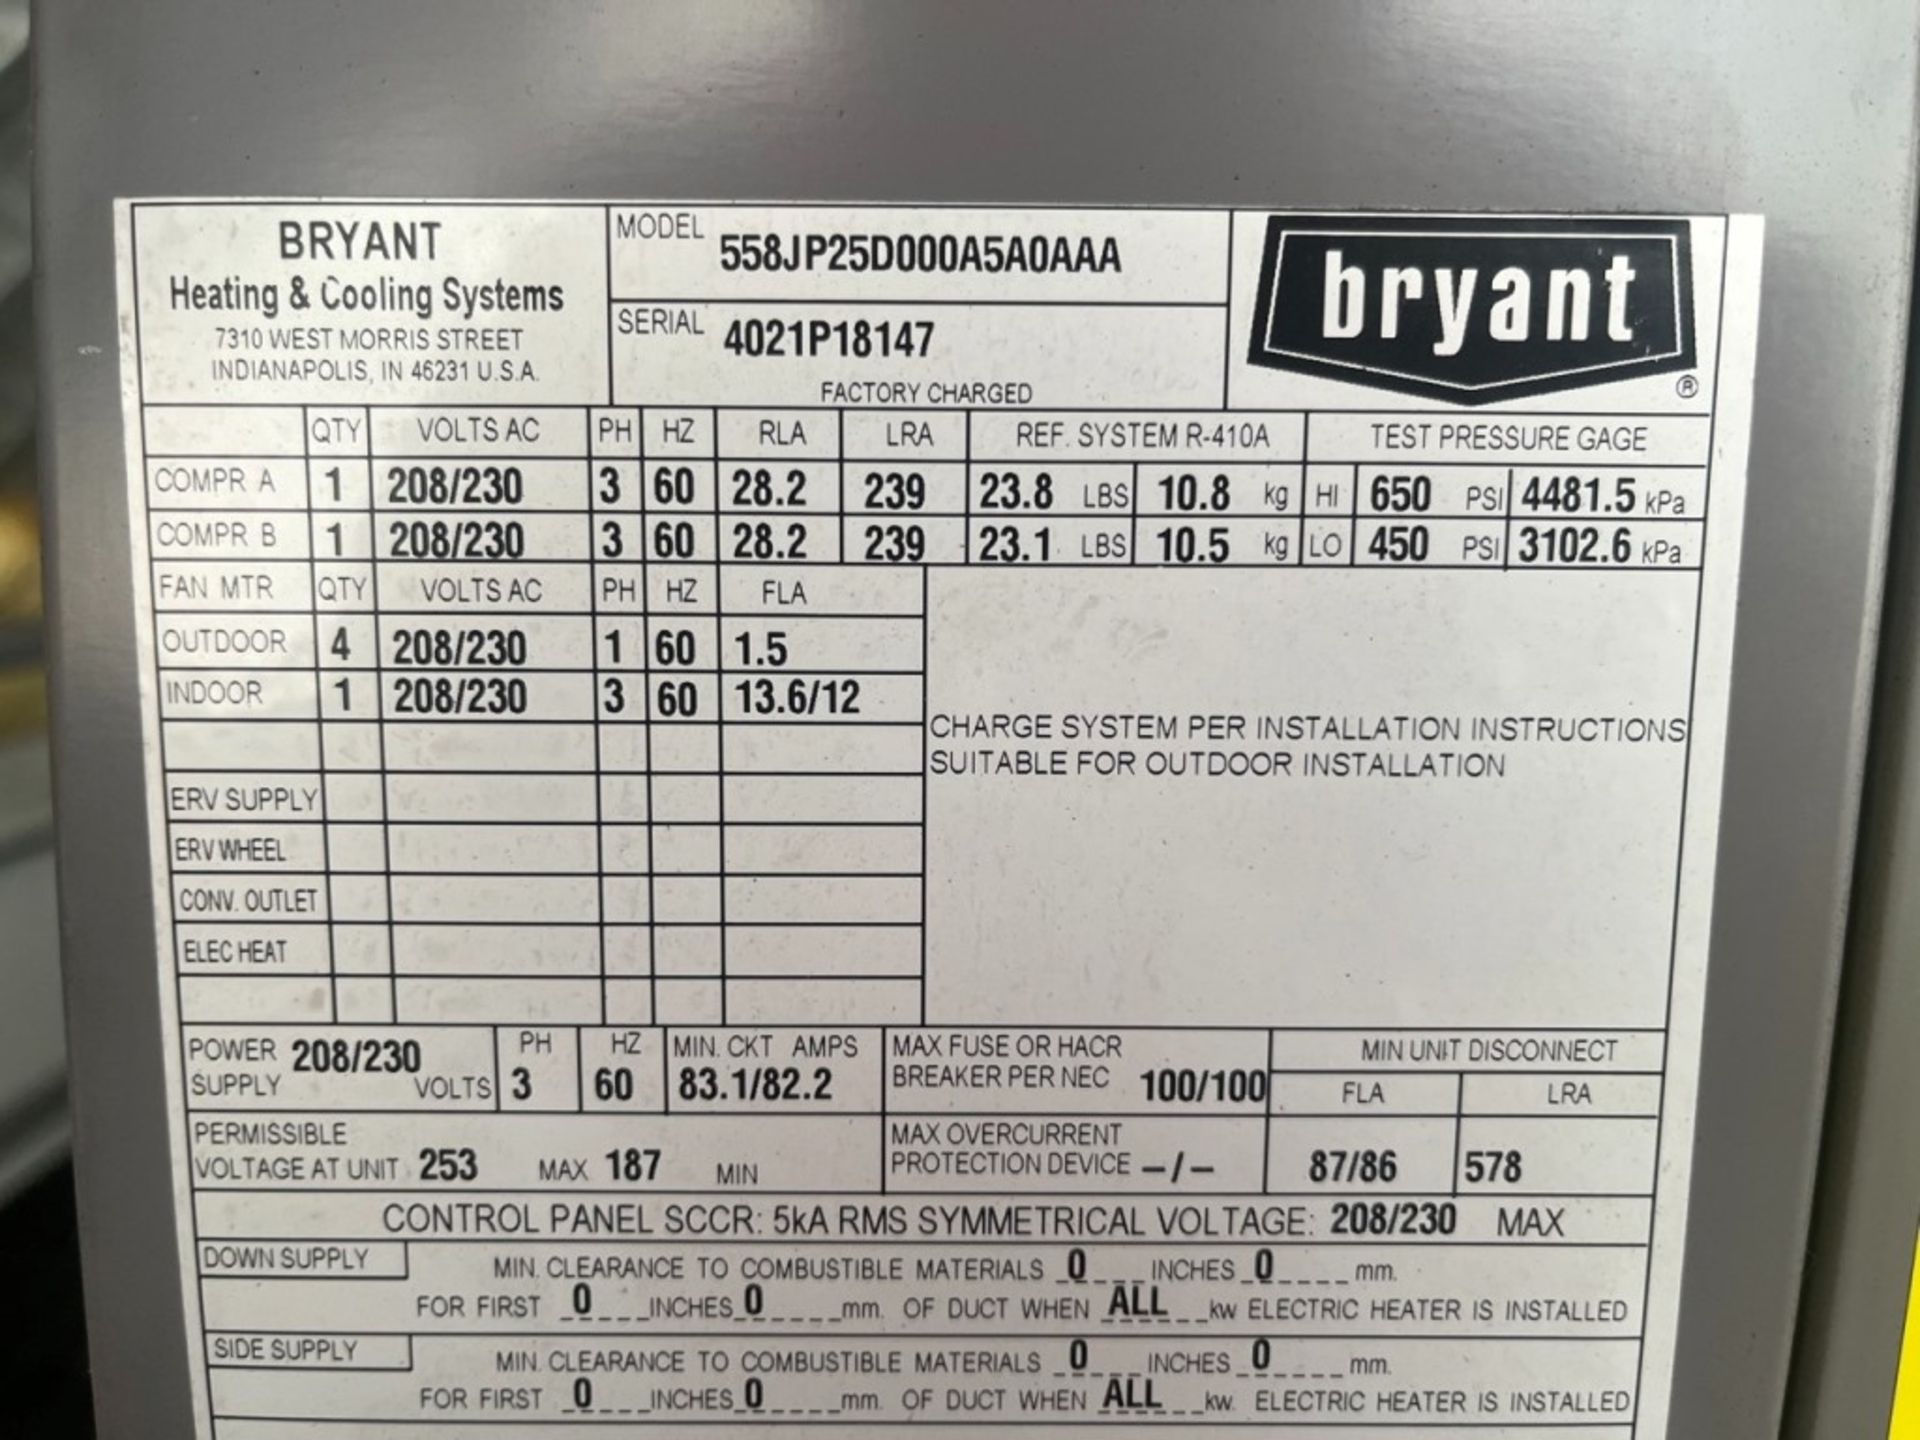 (NEW) Bryant Unit Package Air Model 558JP25D000A5A0AAAAA, Serial No. 4021P18147; Includes ductwork - Image 21 of 26